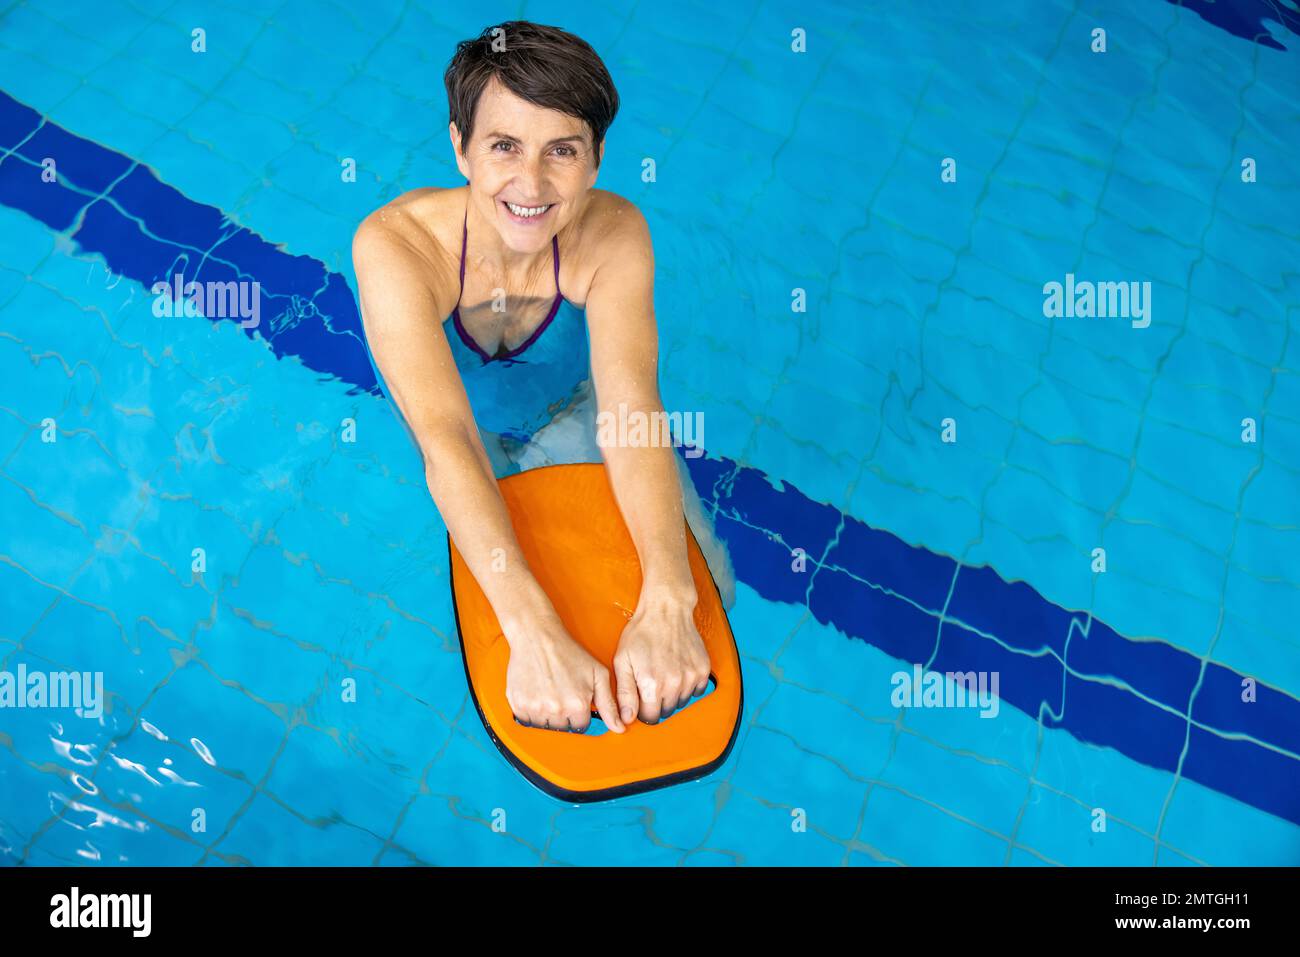 Short-haired smiling caucasian woman swimming in the swimming pool Stock Photo